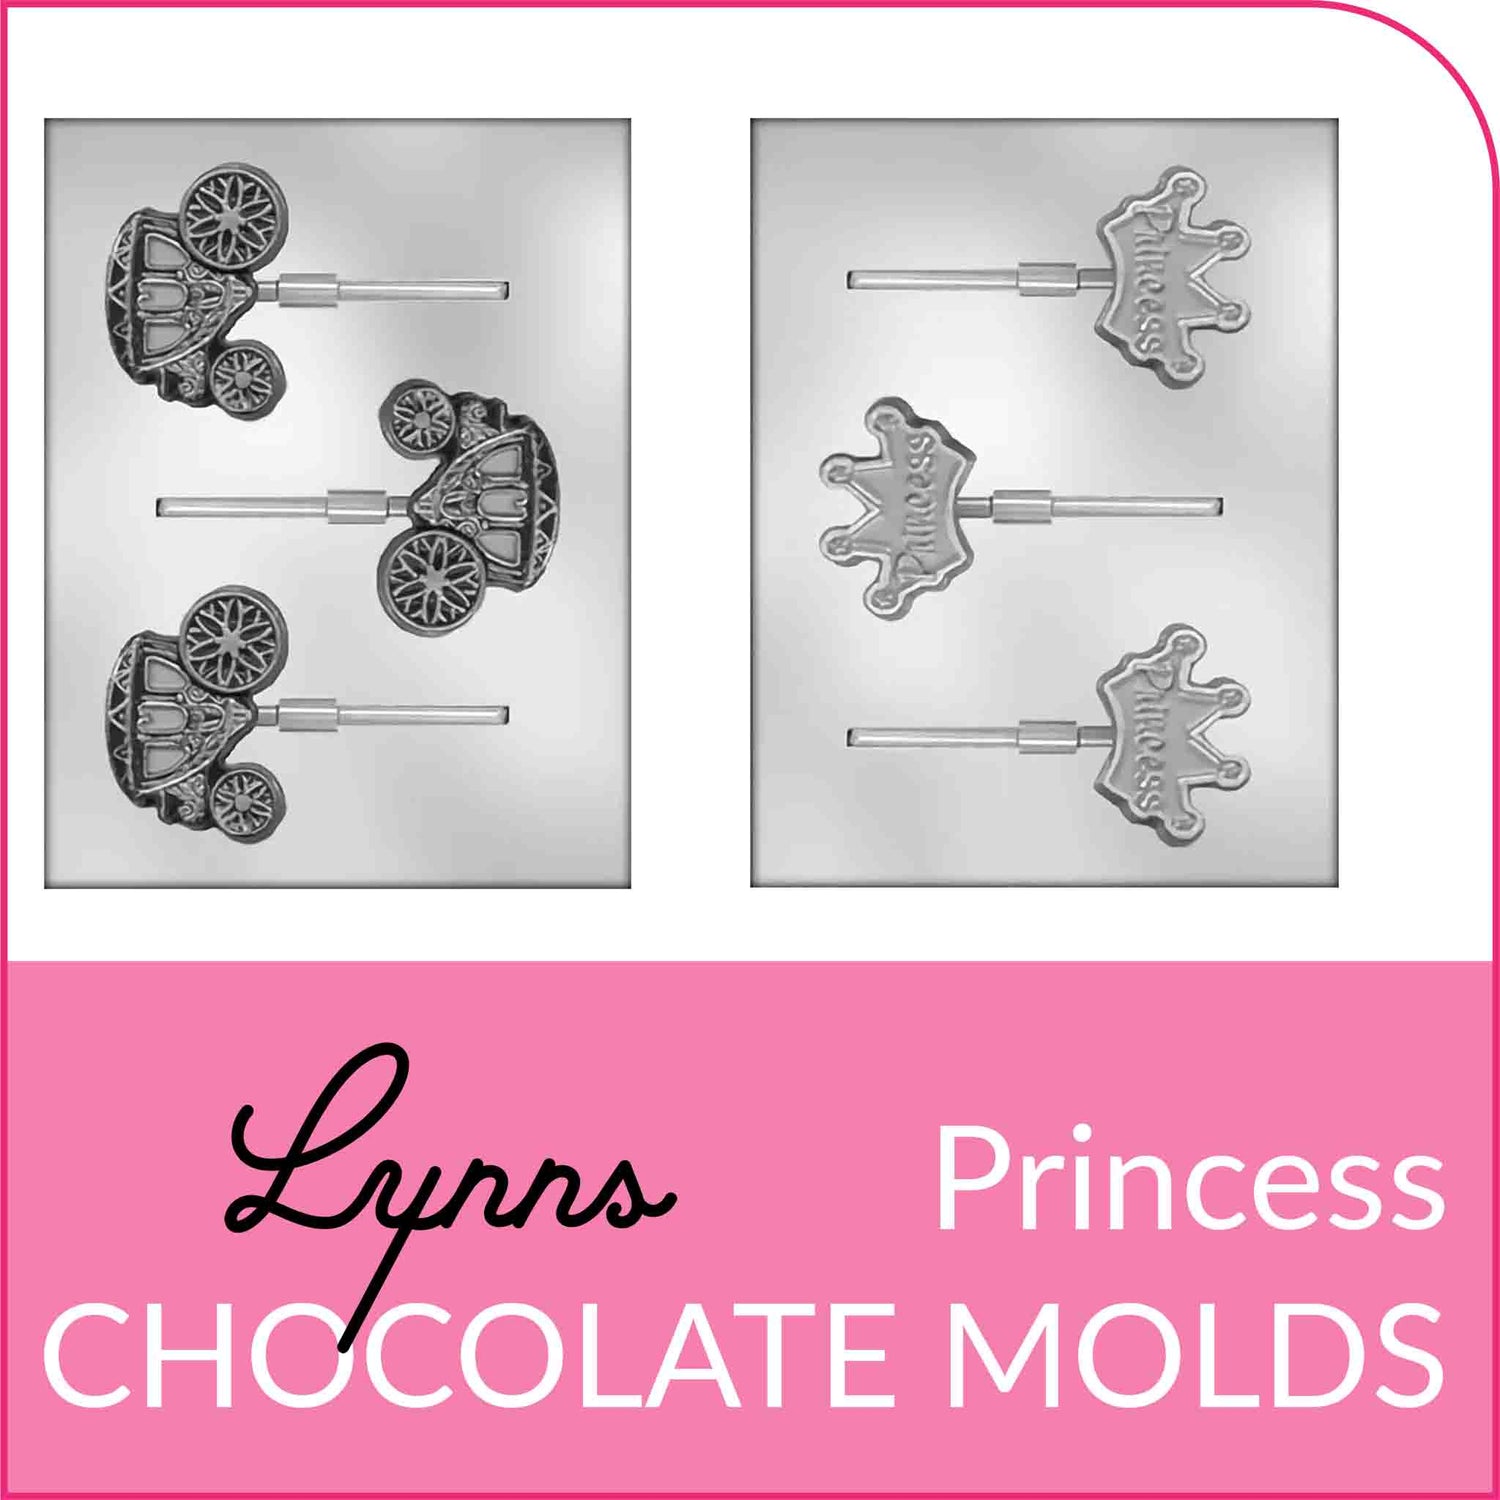 Shop Princess Themed Chocolate Molds from Lynn's Cake, Candy, and Chocolate.